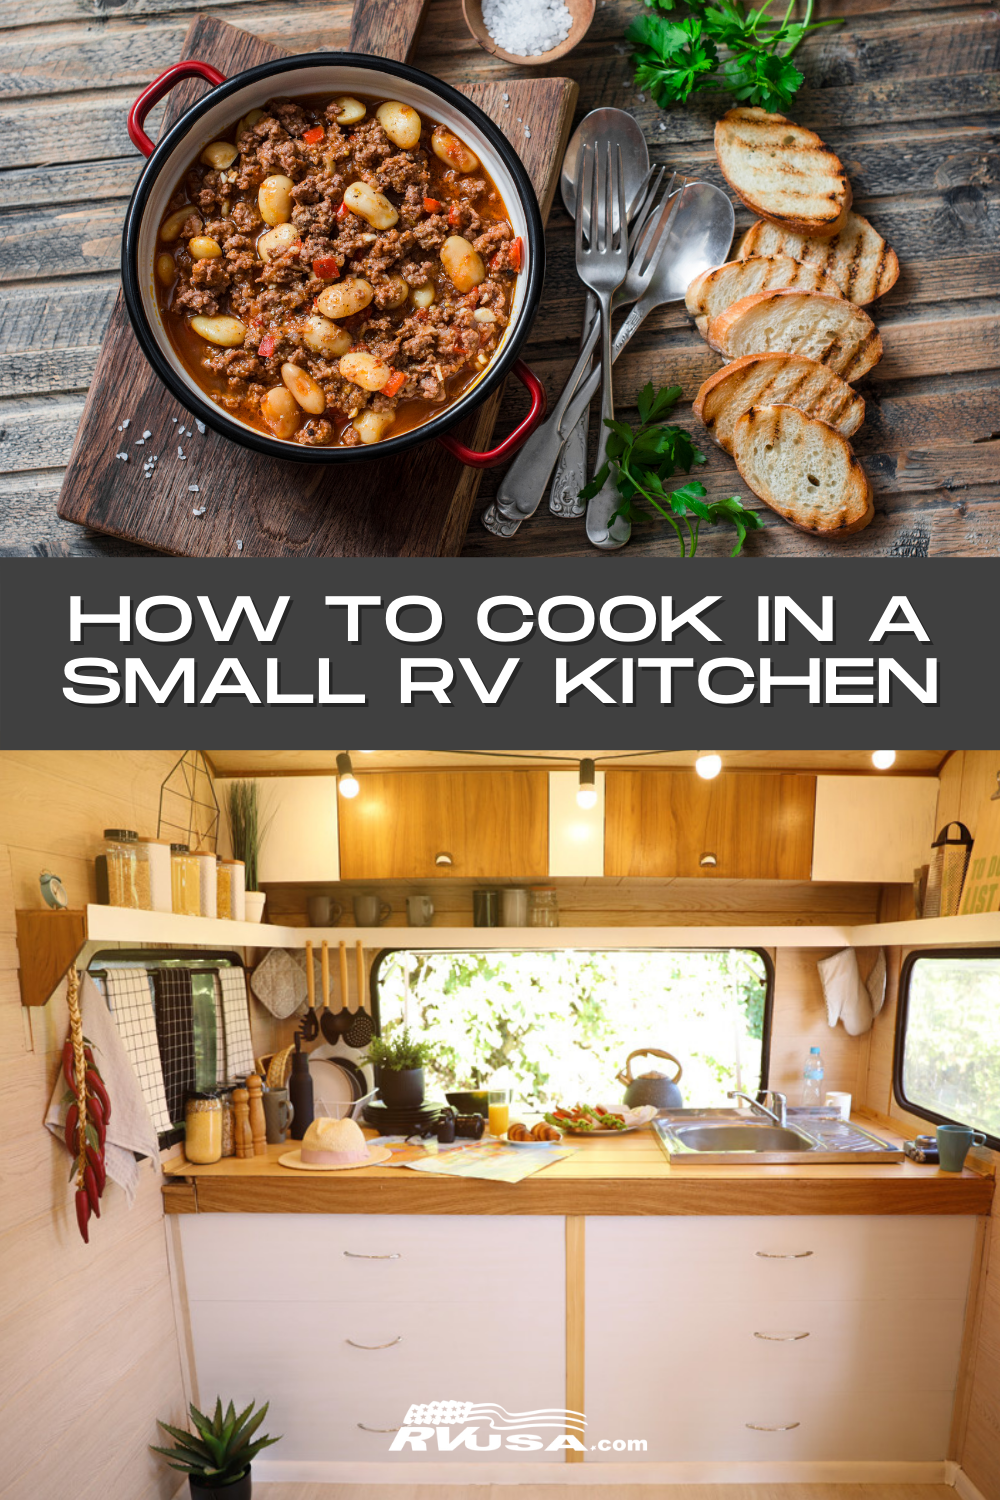 An image of a meal made with RV kitchen cooking, along with an image of an RV kitchen.